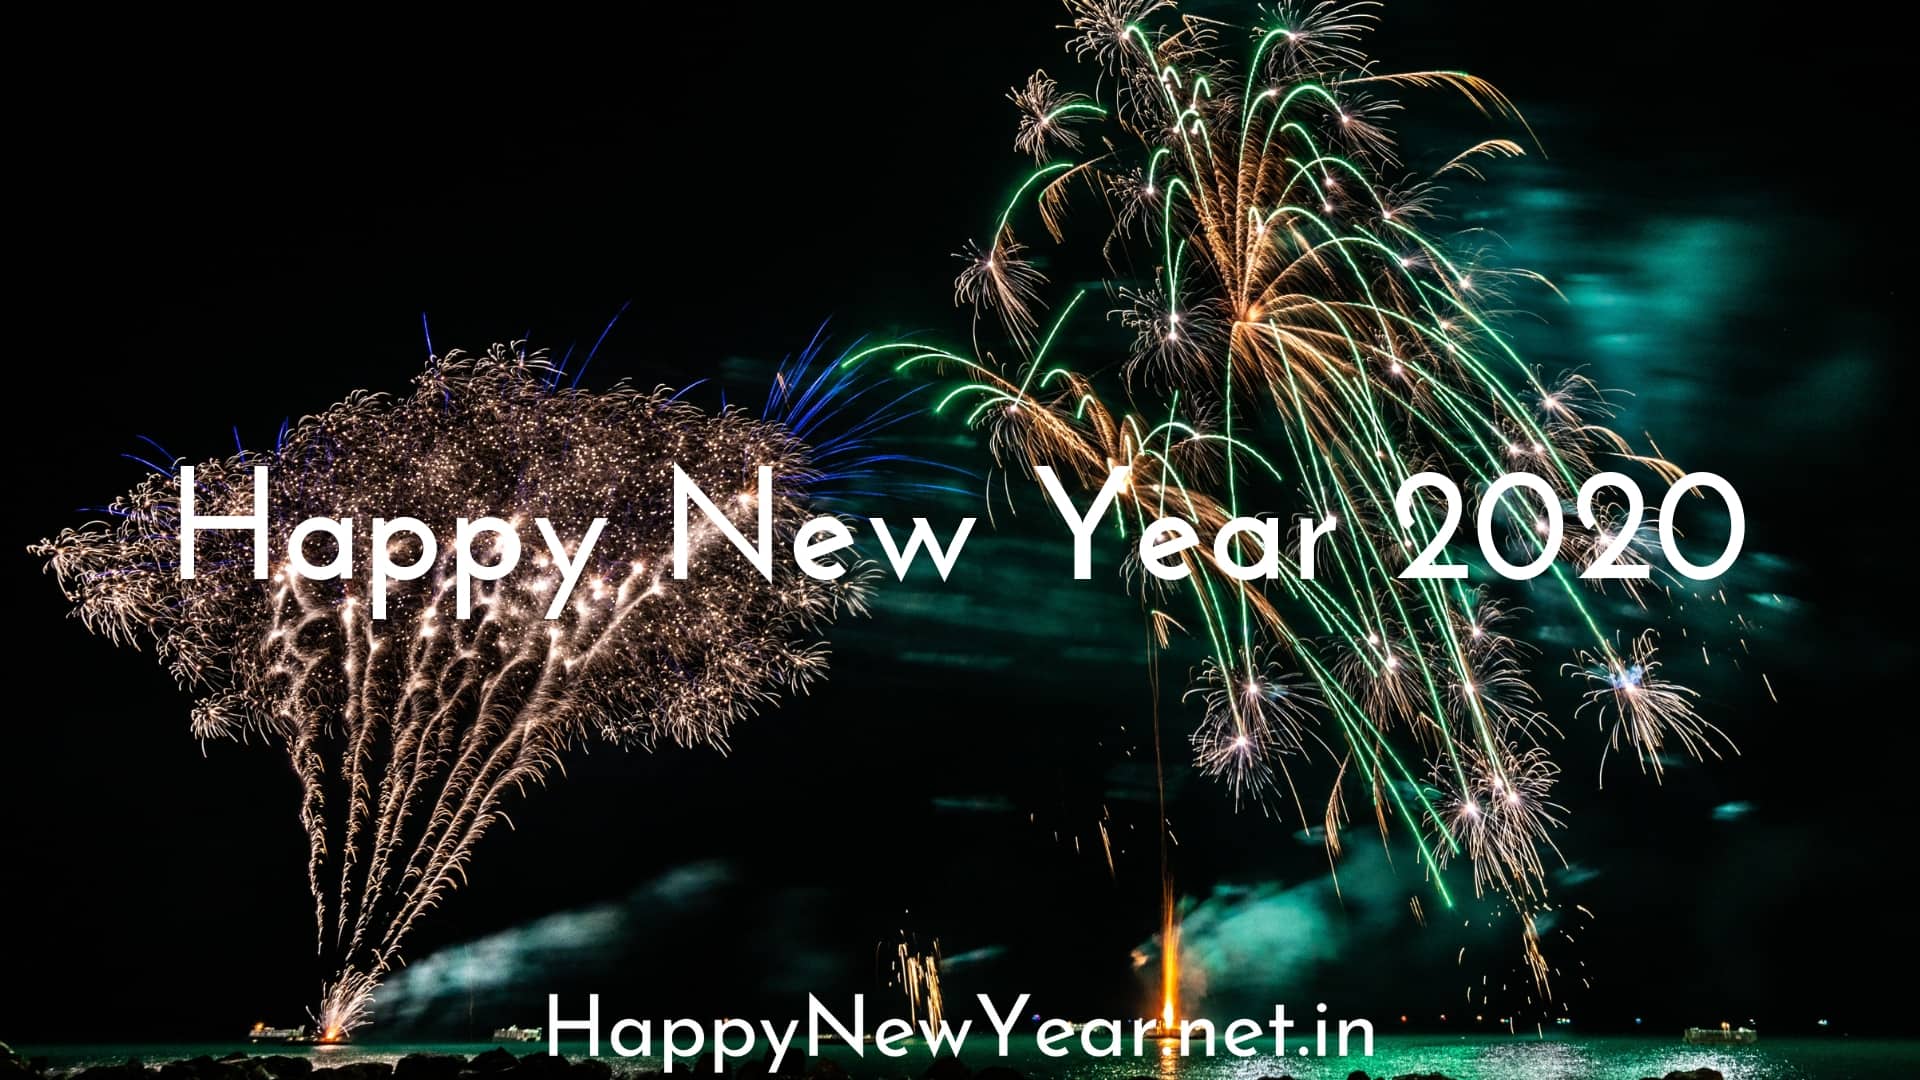 Happy New Year Images For Facebook - Happy New Year 2020 - HD Wallpaper 